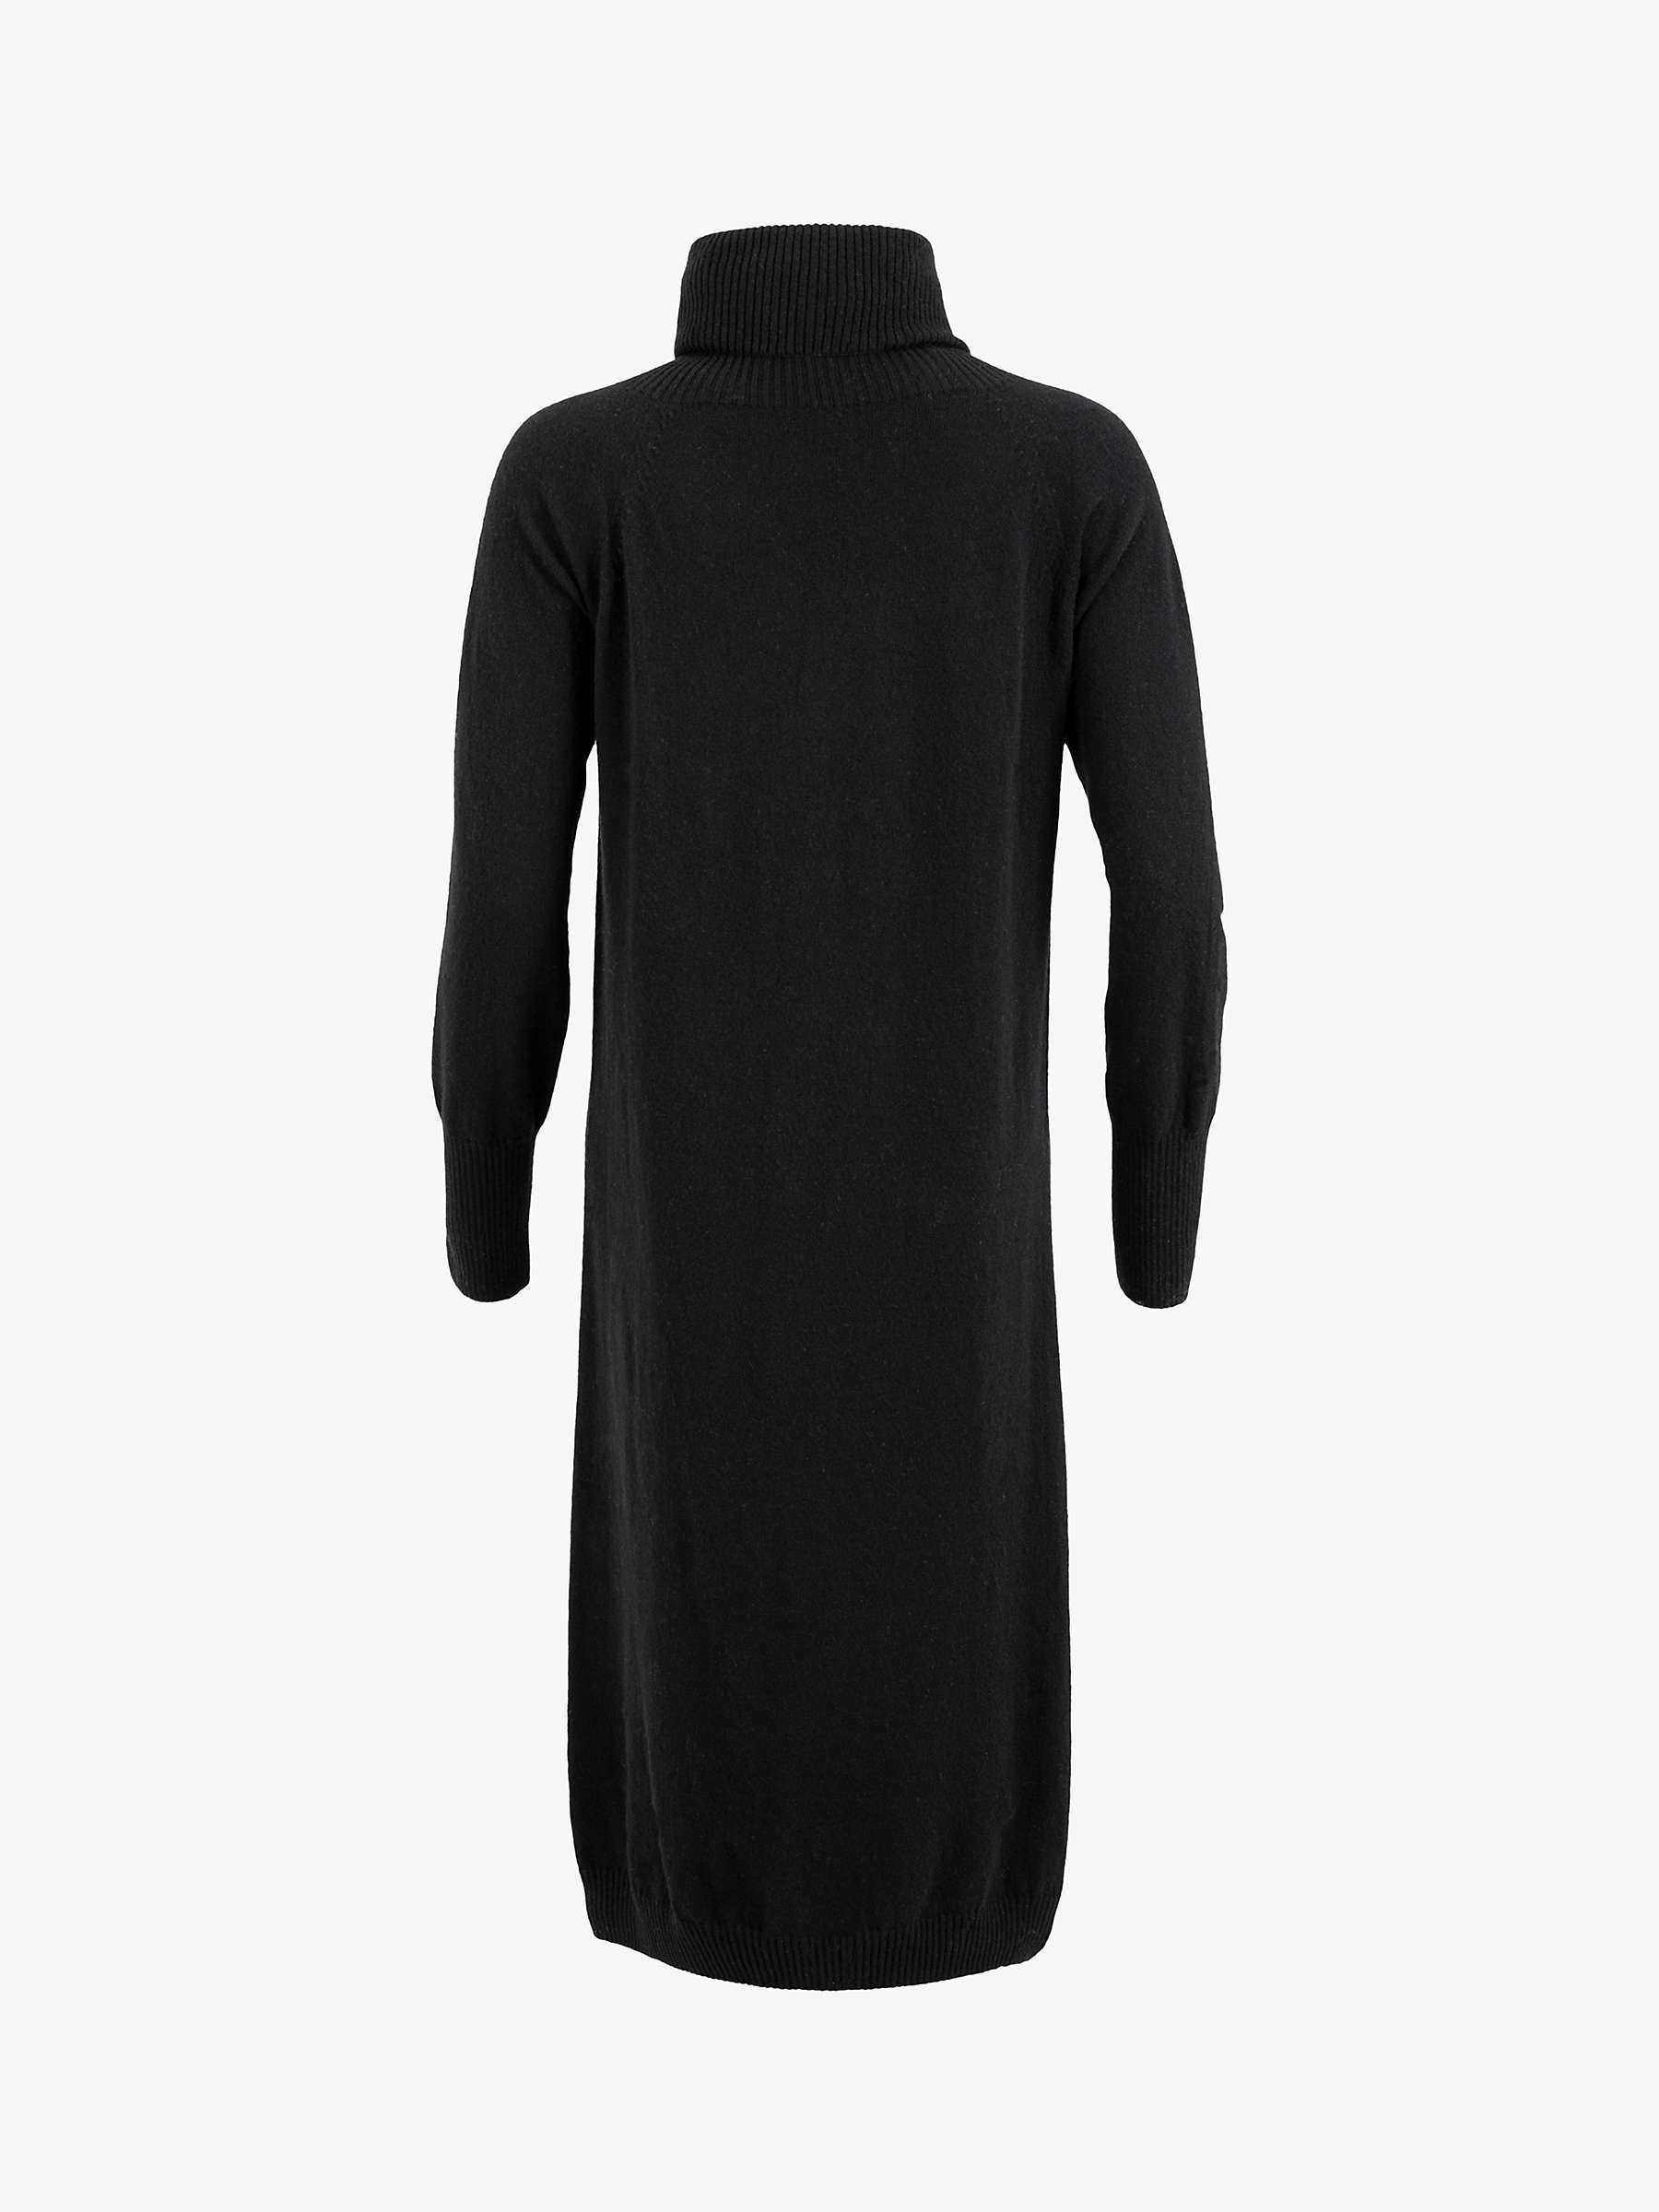 Buy Celtic & Co. Wool Slouch Roll Neck Dress Online at johnlewis.com